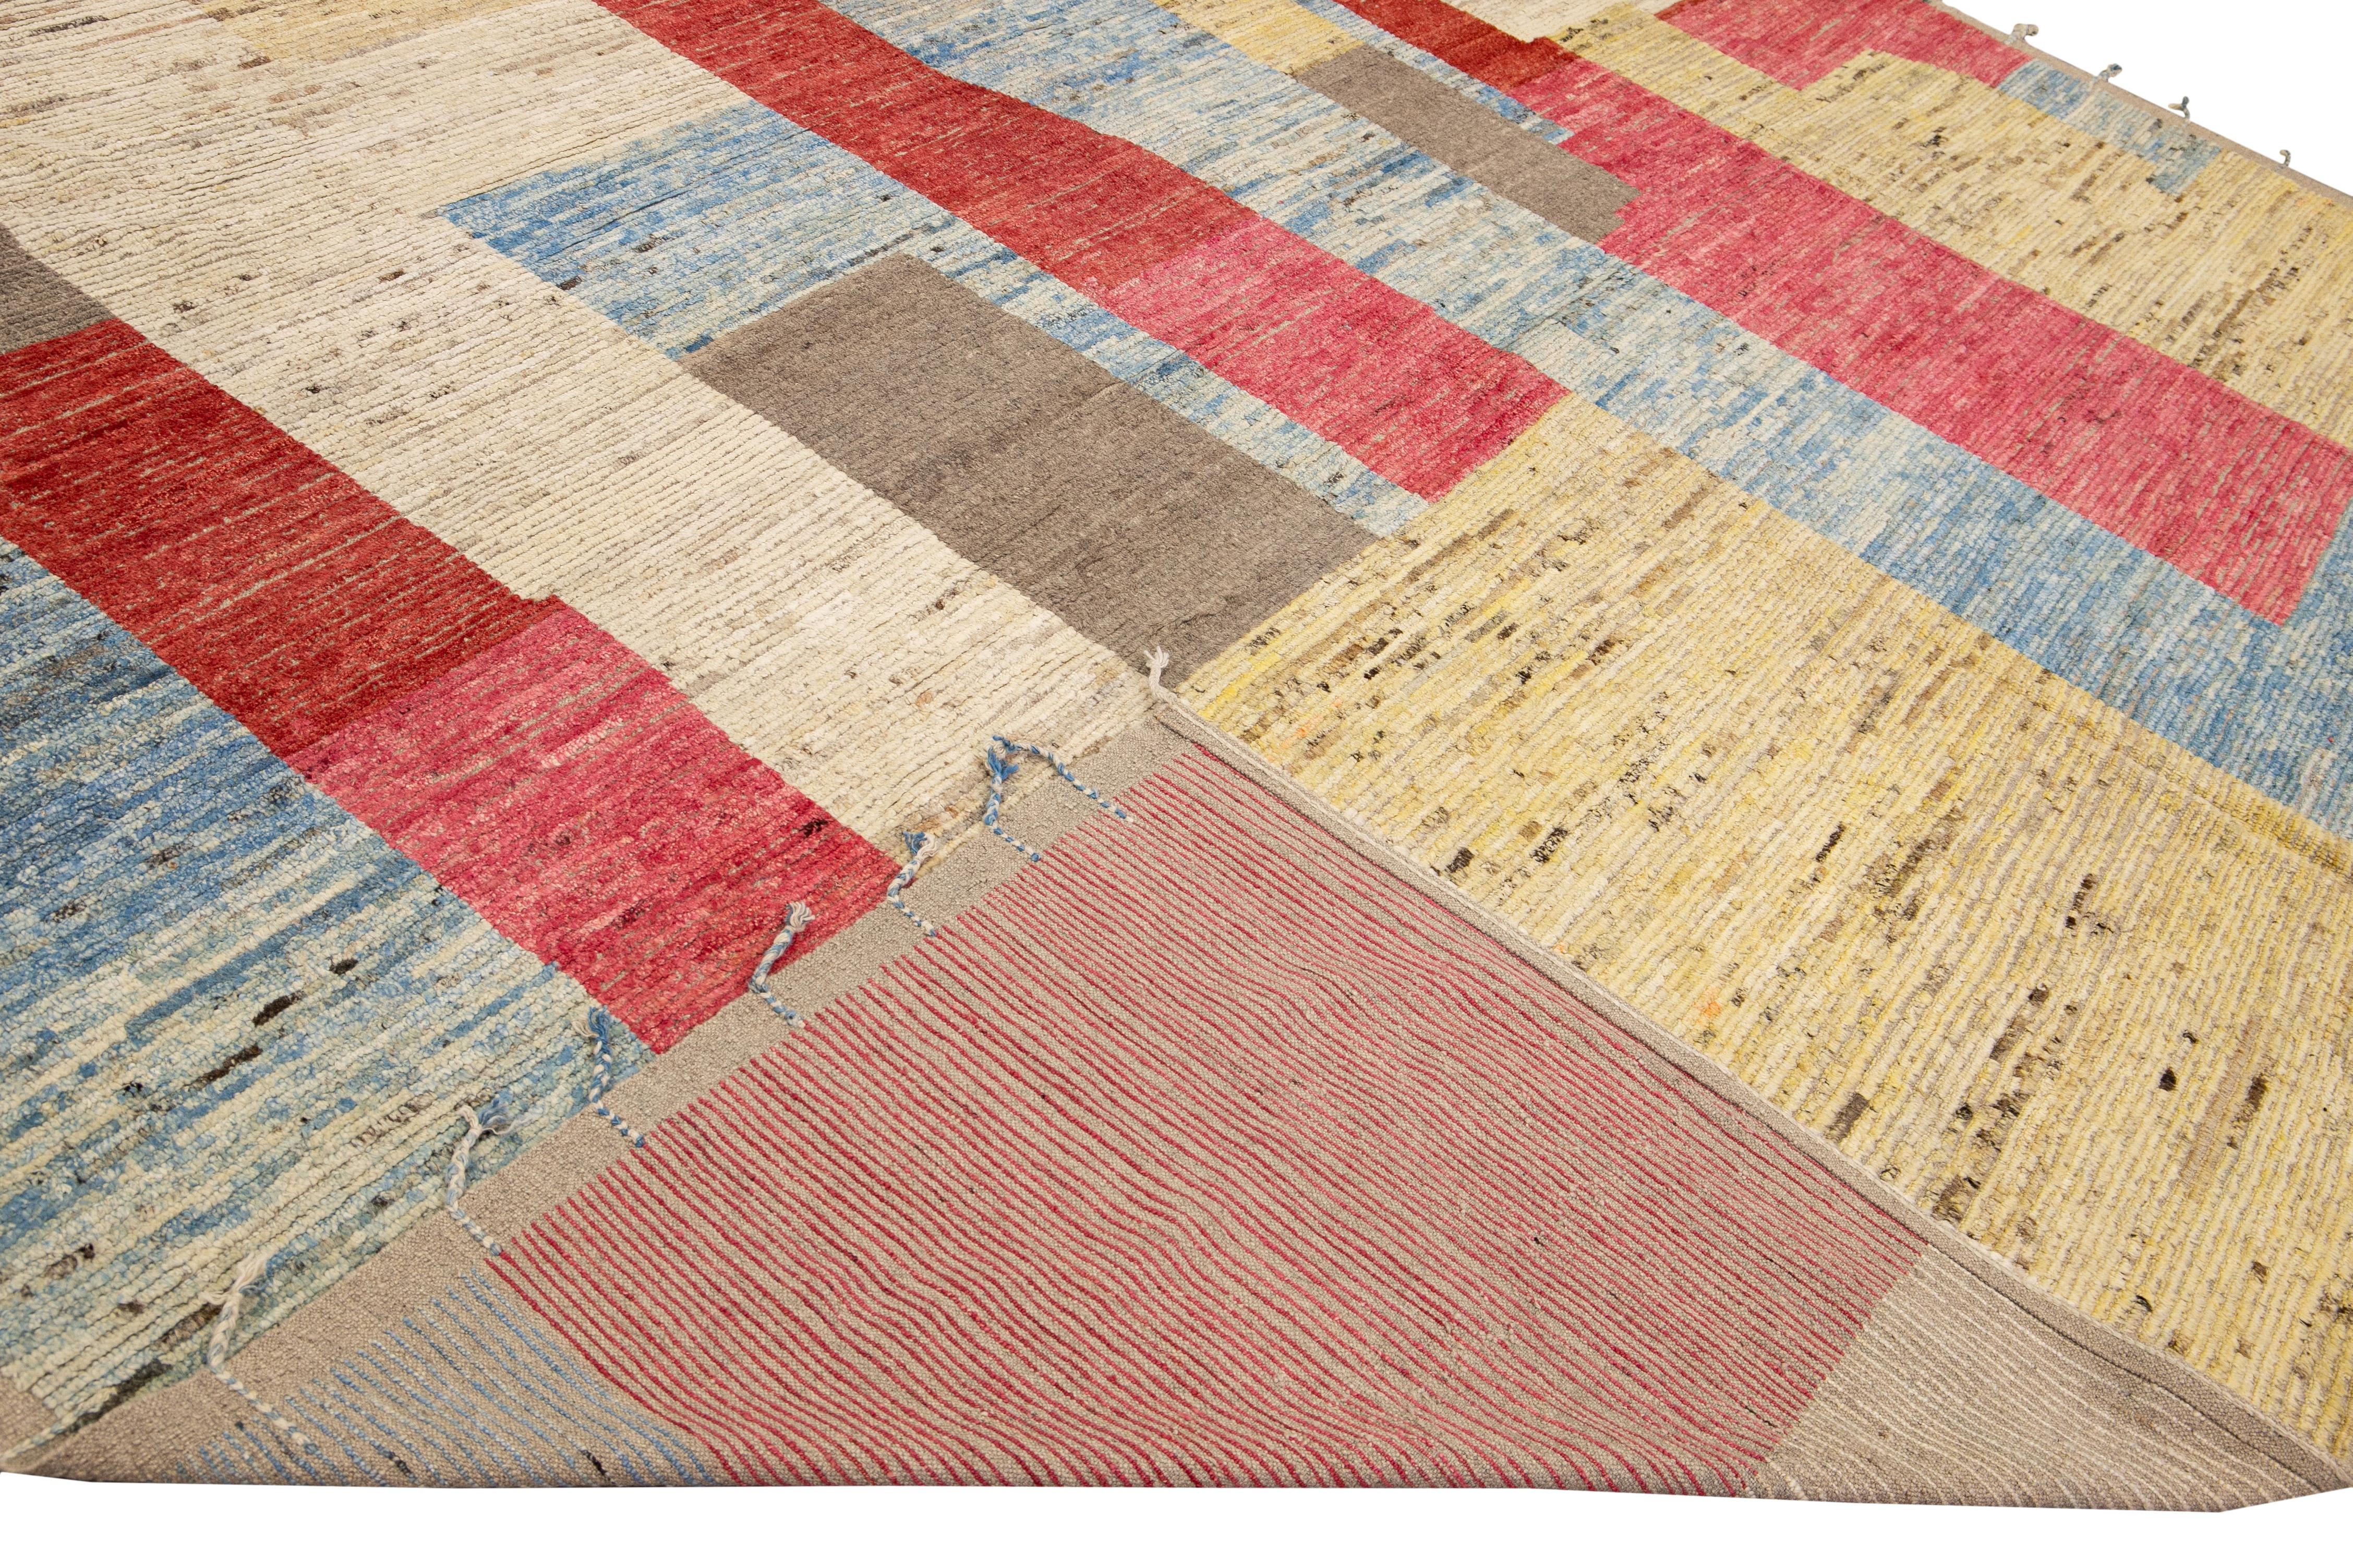 Beautiful Moroccan style handmade wool rug with a beige field. This Modern rug has brown, blue, red, and yellow accents and beige fringes featuring a gorgeous all-over boho minimal design.

This rug measures: 14'4